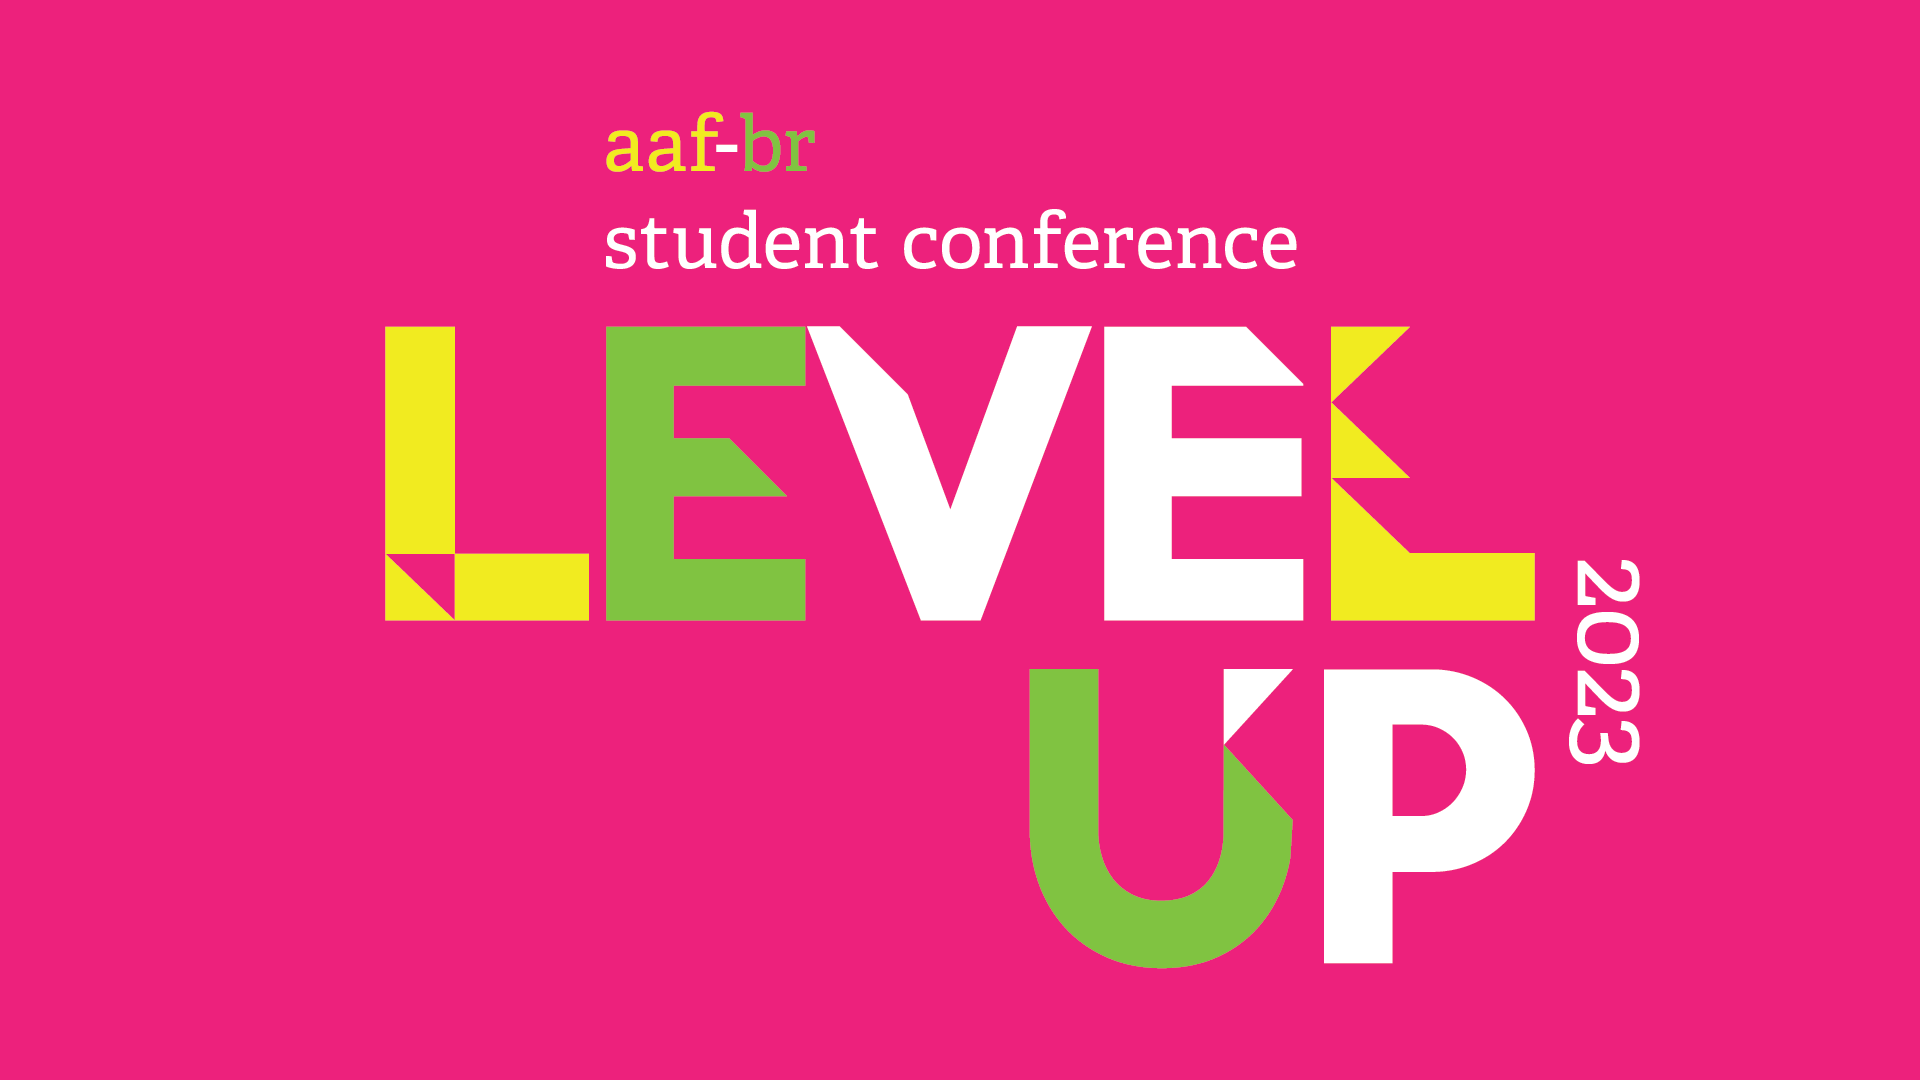 AAF-BR LevelUp Student Conference